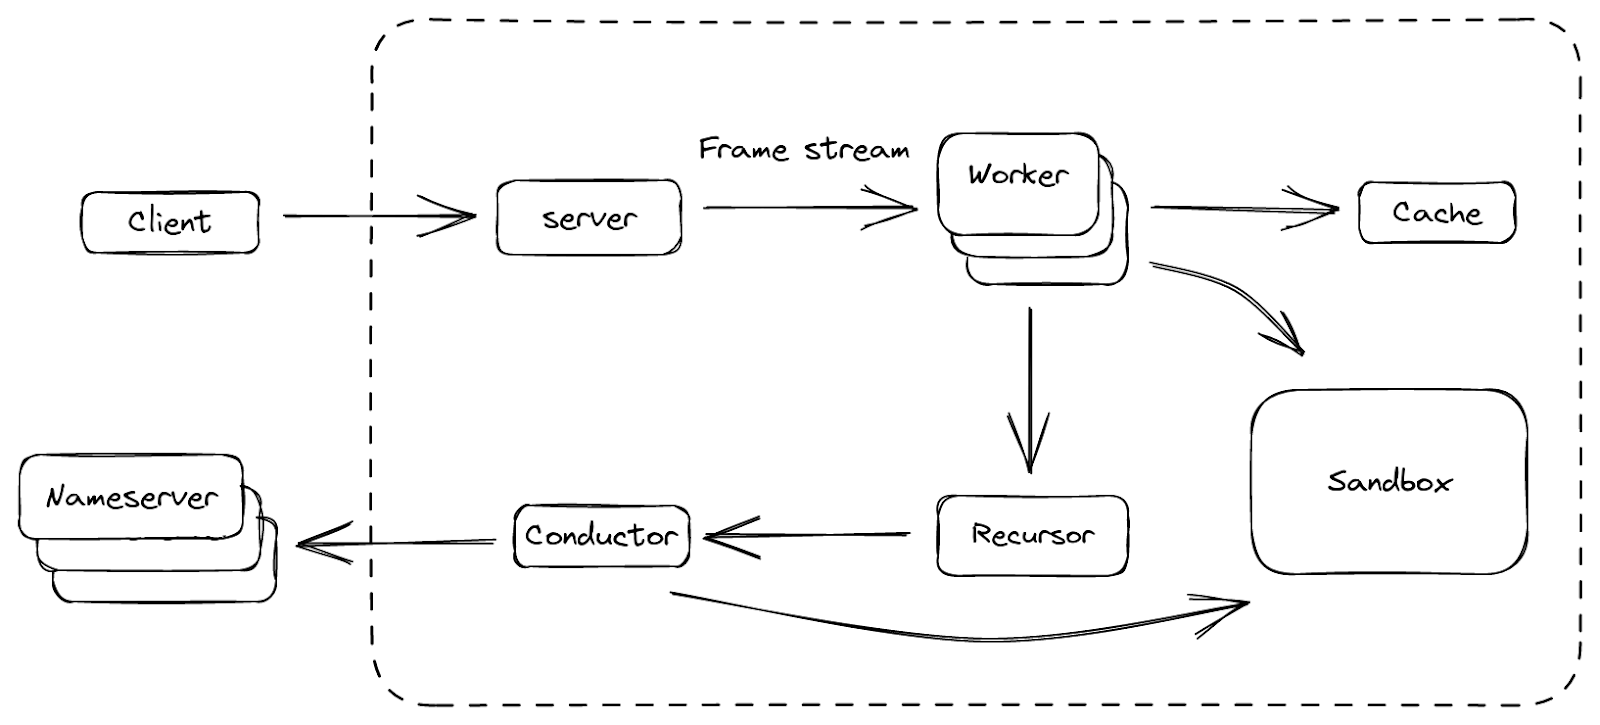 How Rust and Wasm power Cloudflare's 1.1.1.1